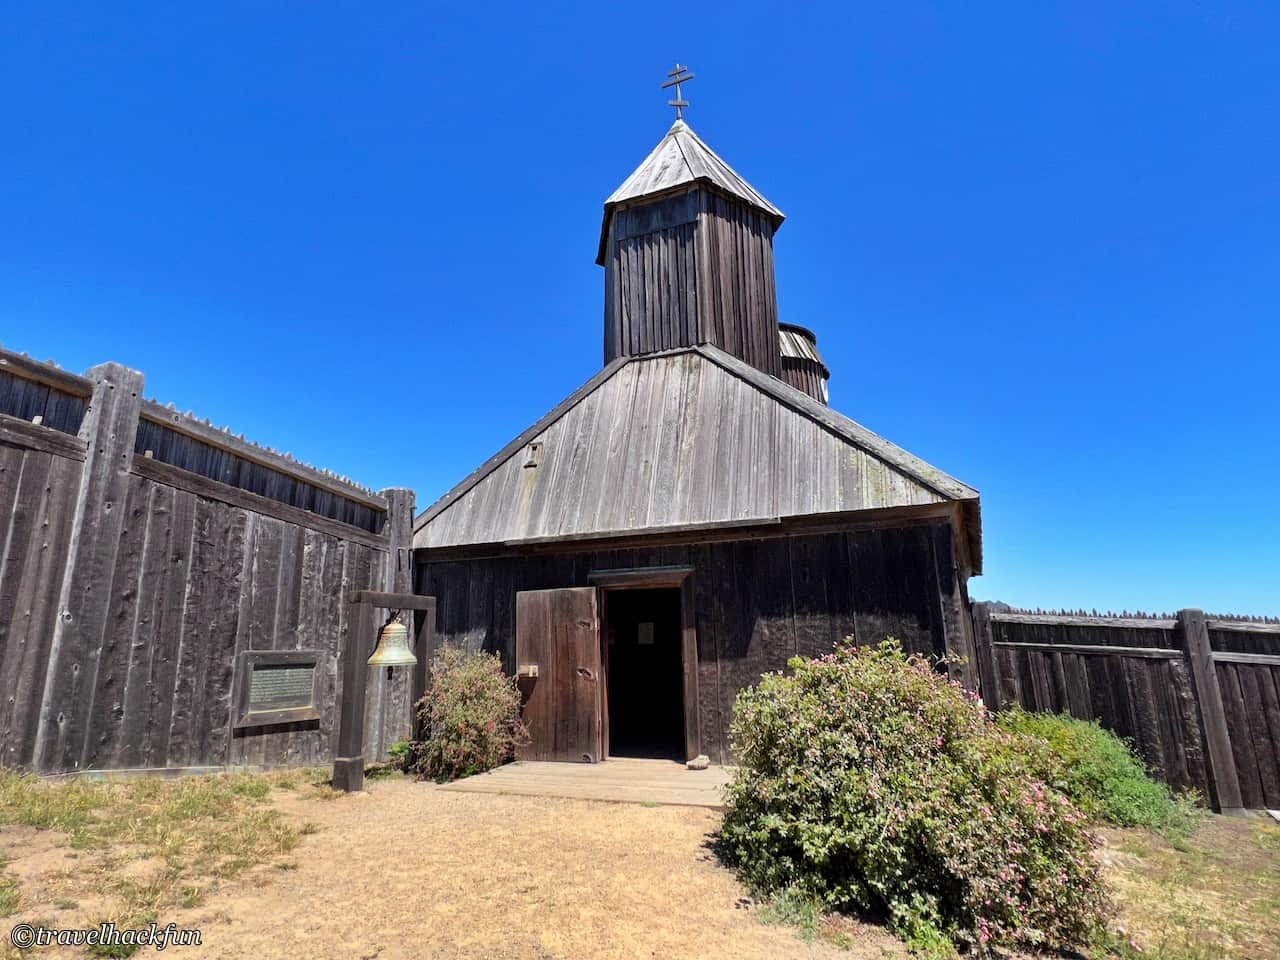 Fort Ross,俄羅斯堡,fort ross state park,fort ross state historic park,fort ross california 26